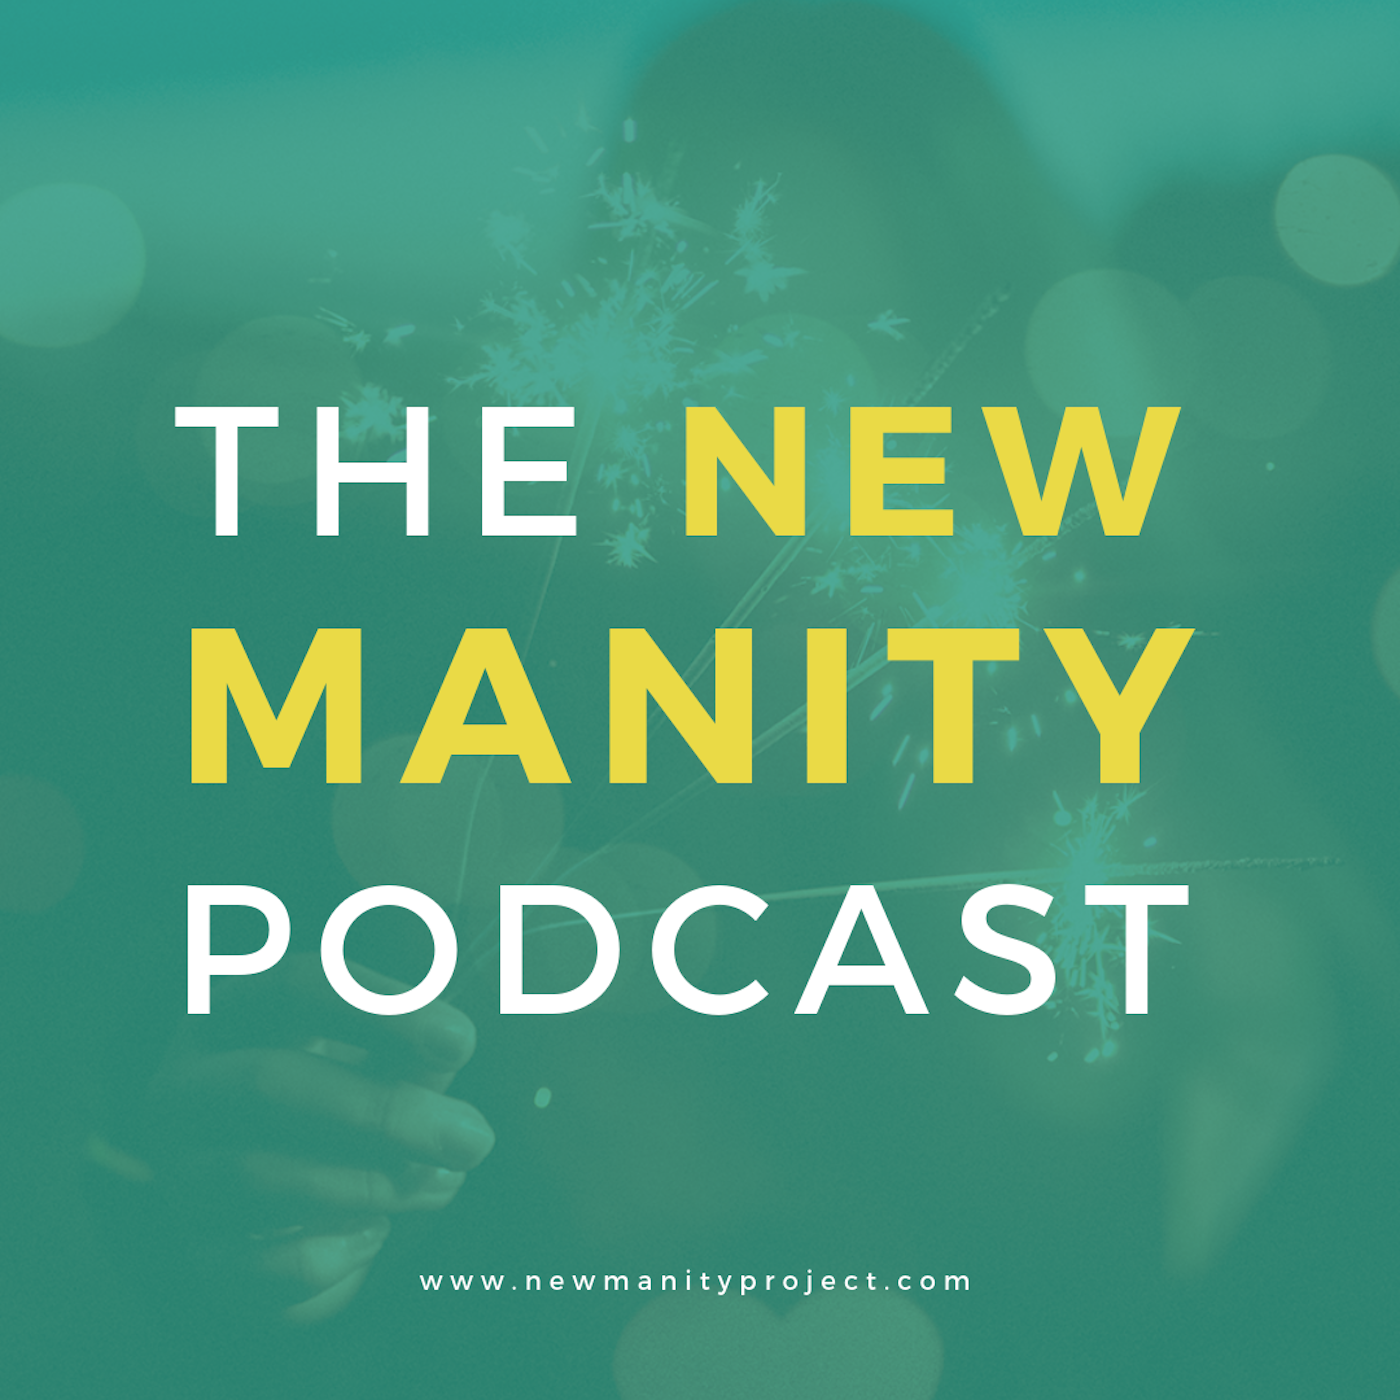 The Newmanity Podcast